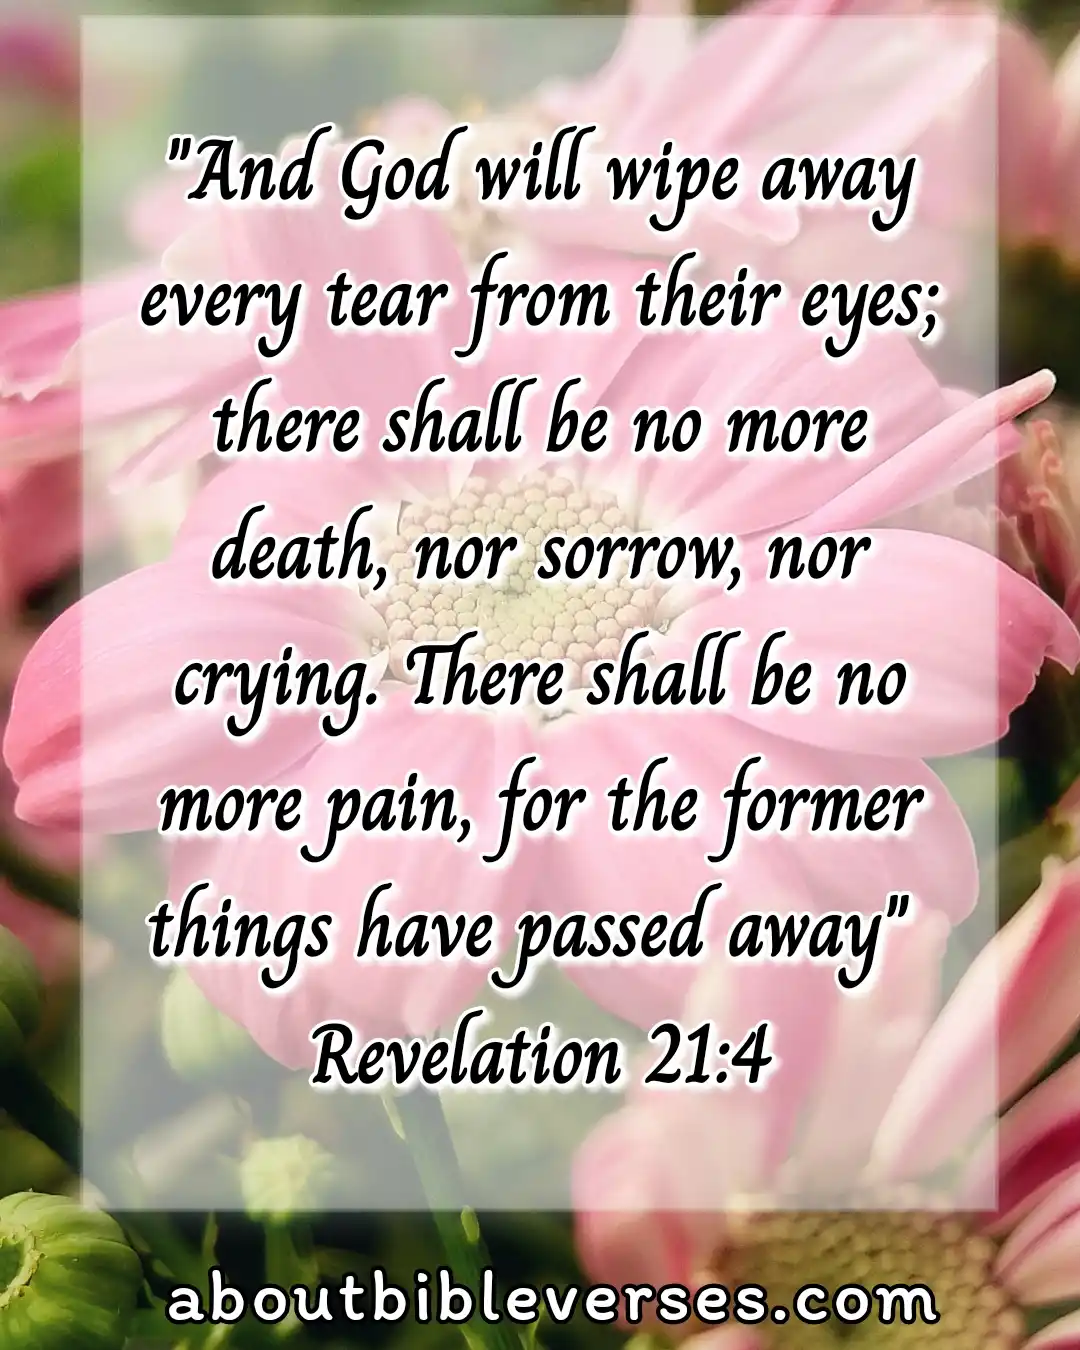 Bible Verses About Pain And Suffering (Revelation 21:4)